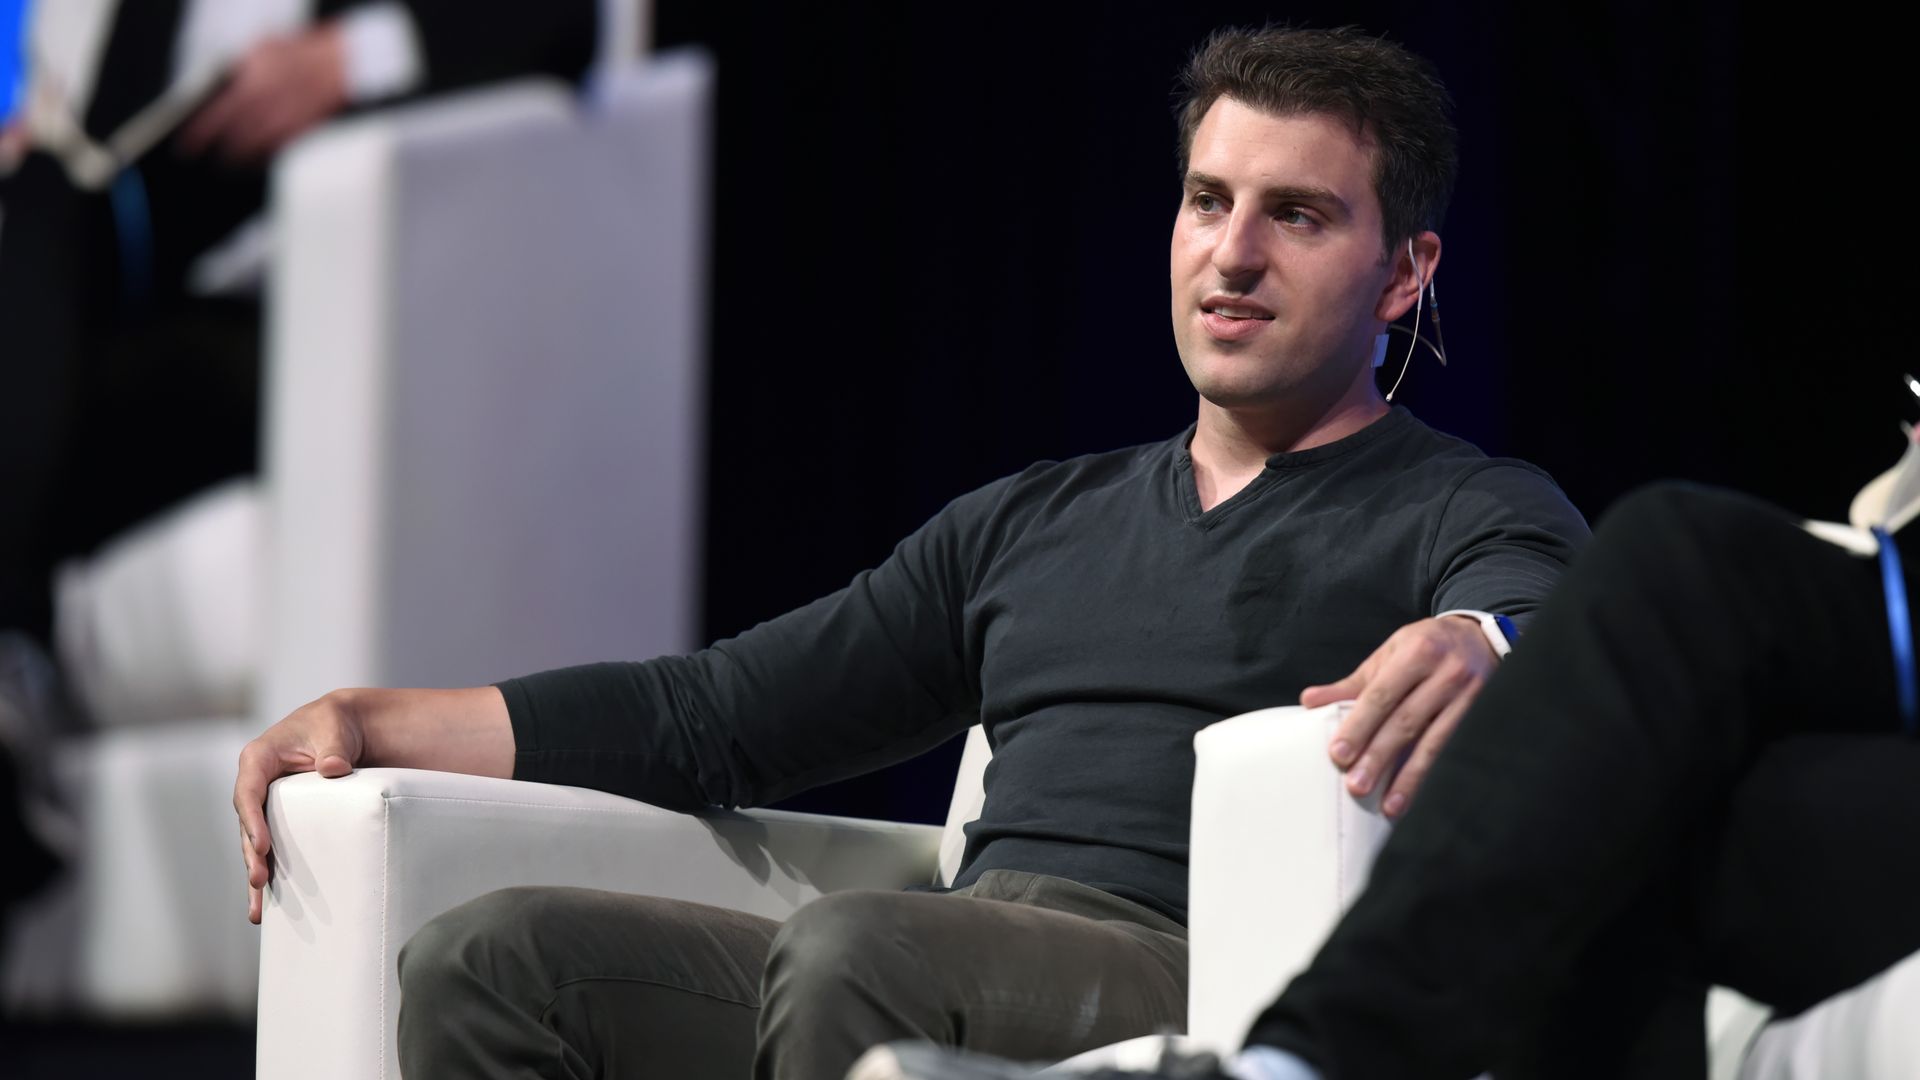 CEO of airbnb brian chesky sitting in a chair.